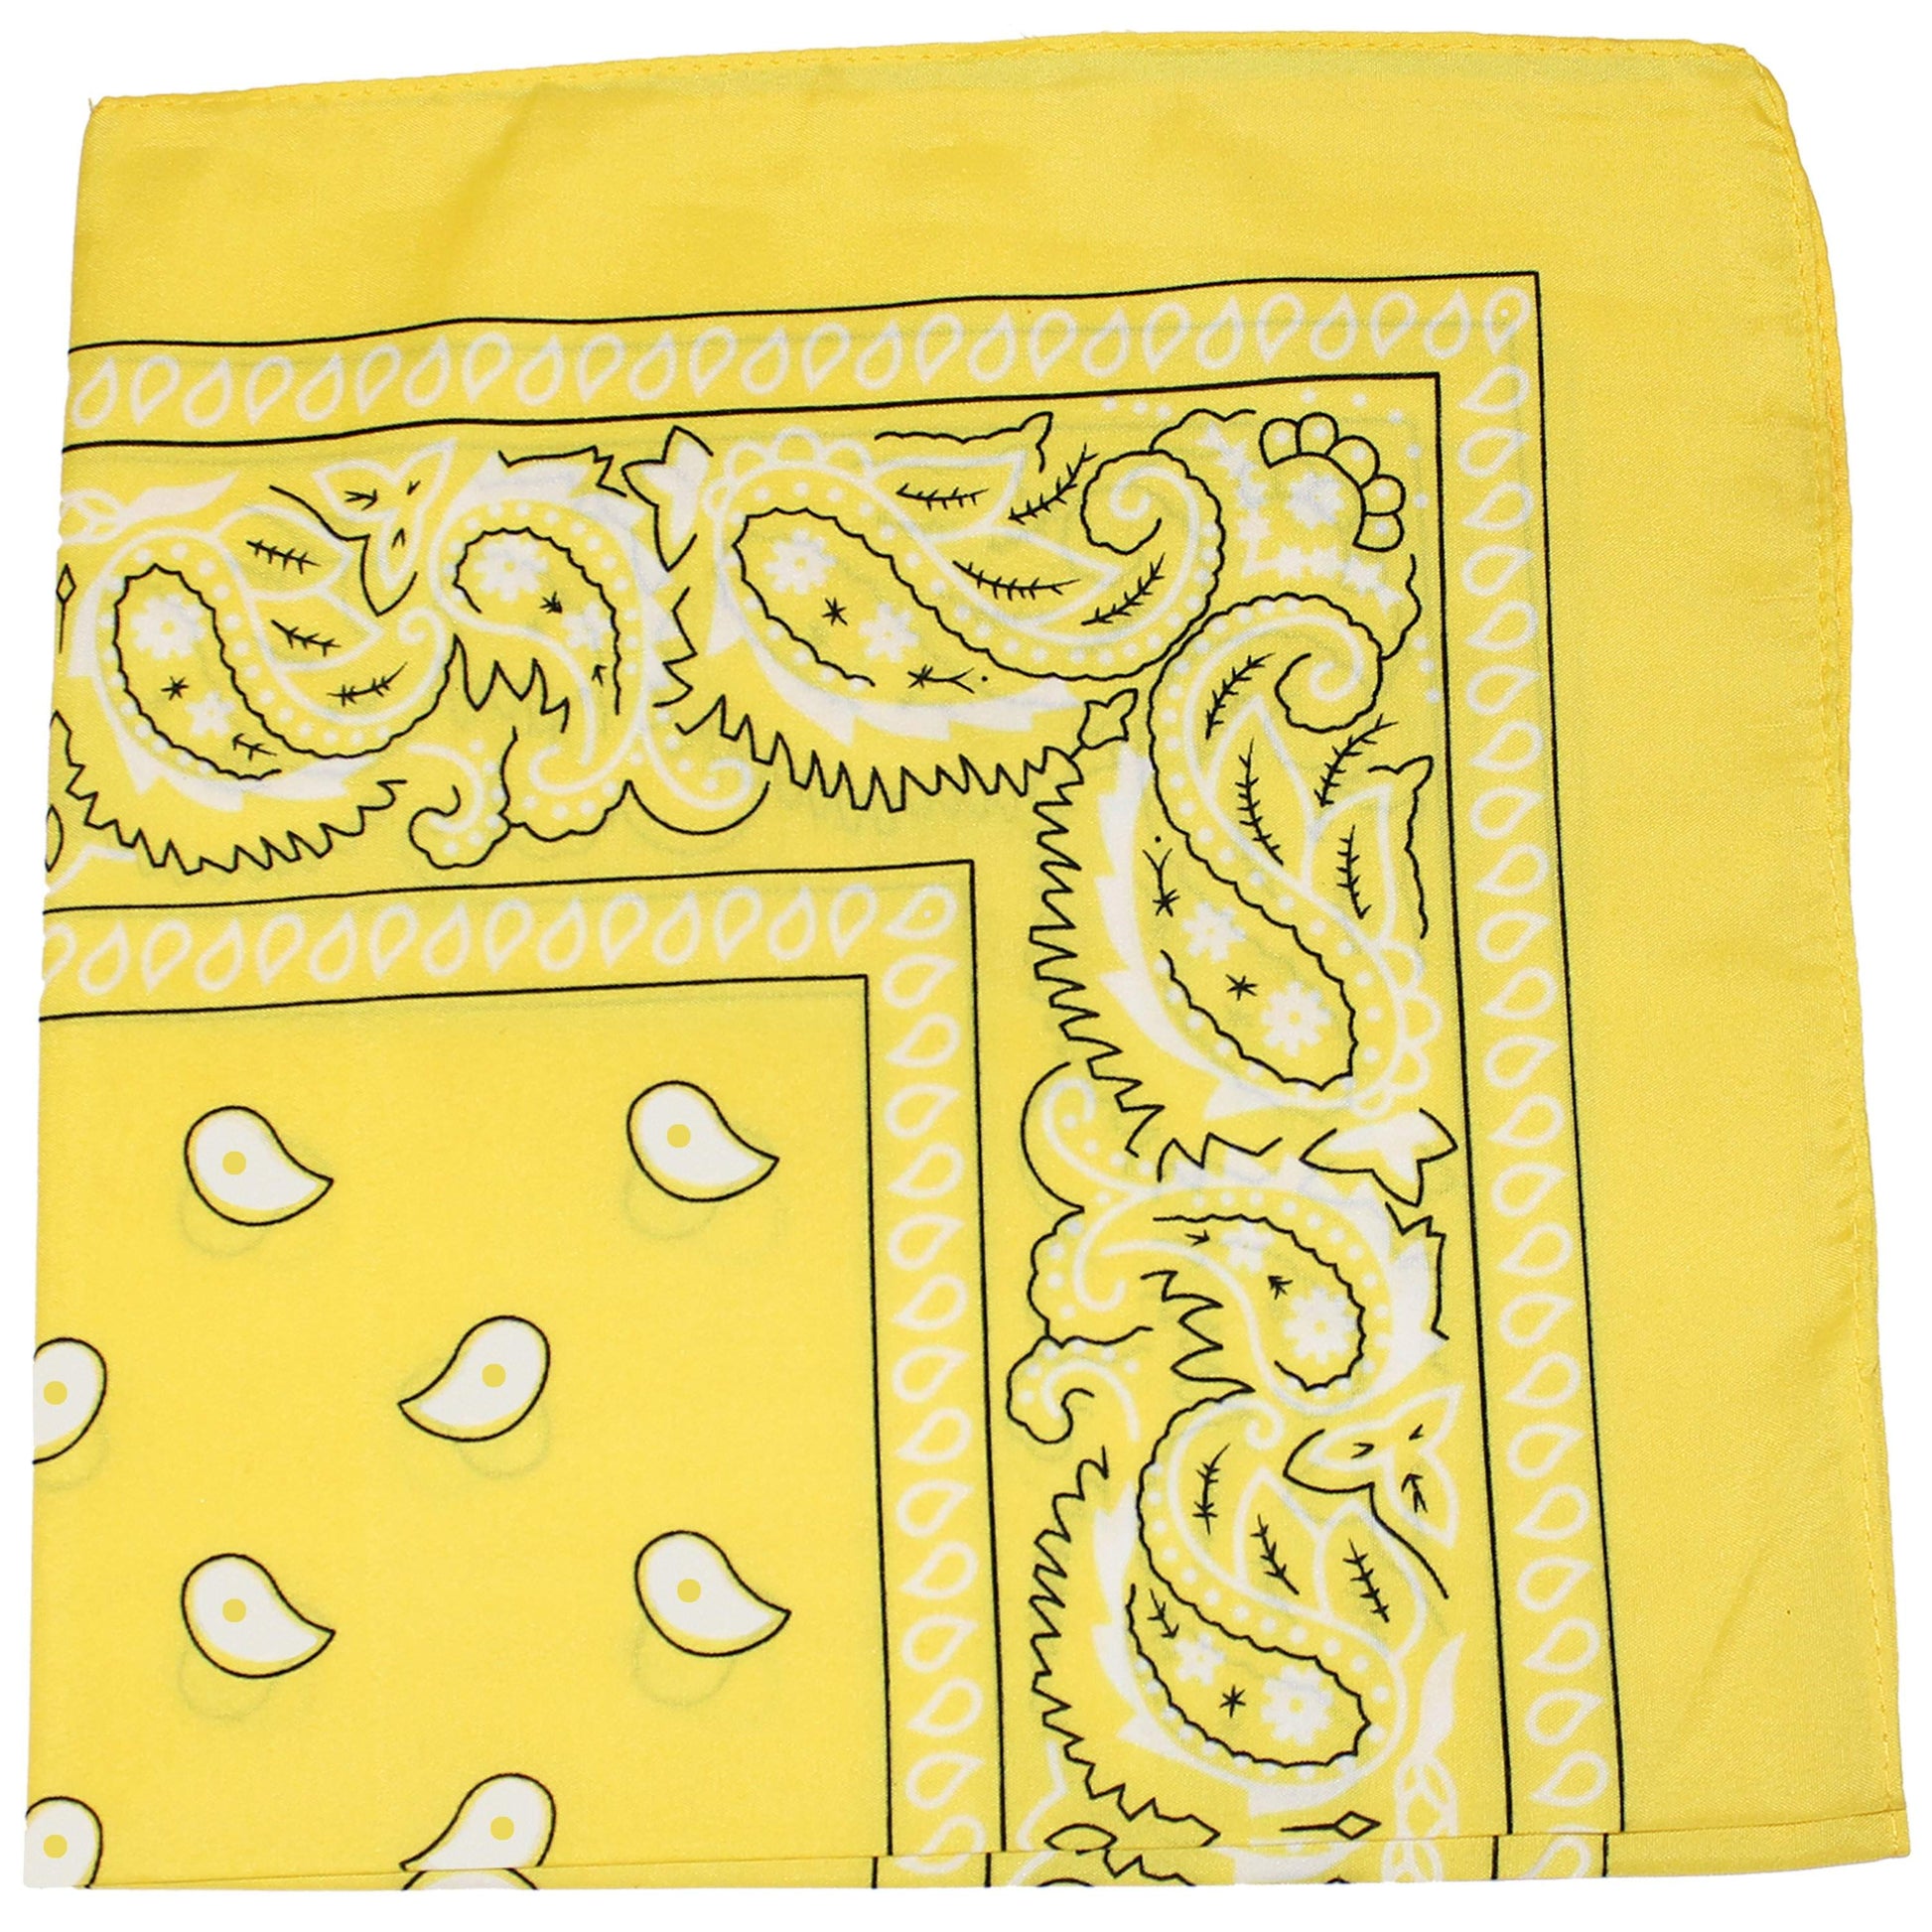 Qraftsy Cotton Bandana - Paisley and Solid Colors Available - 12 Pack